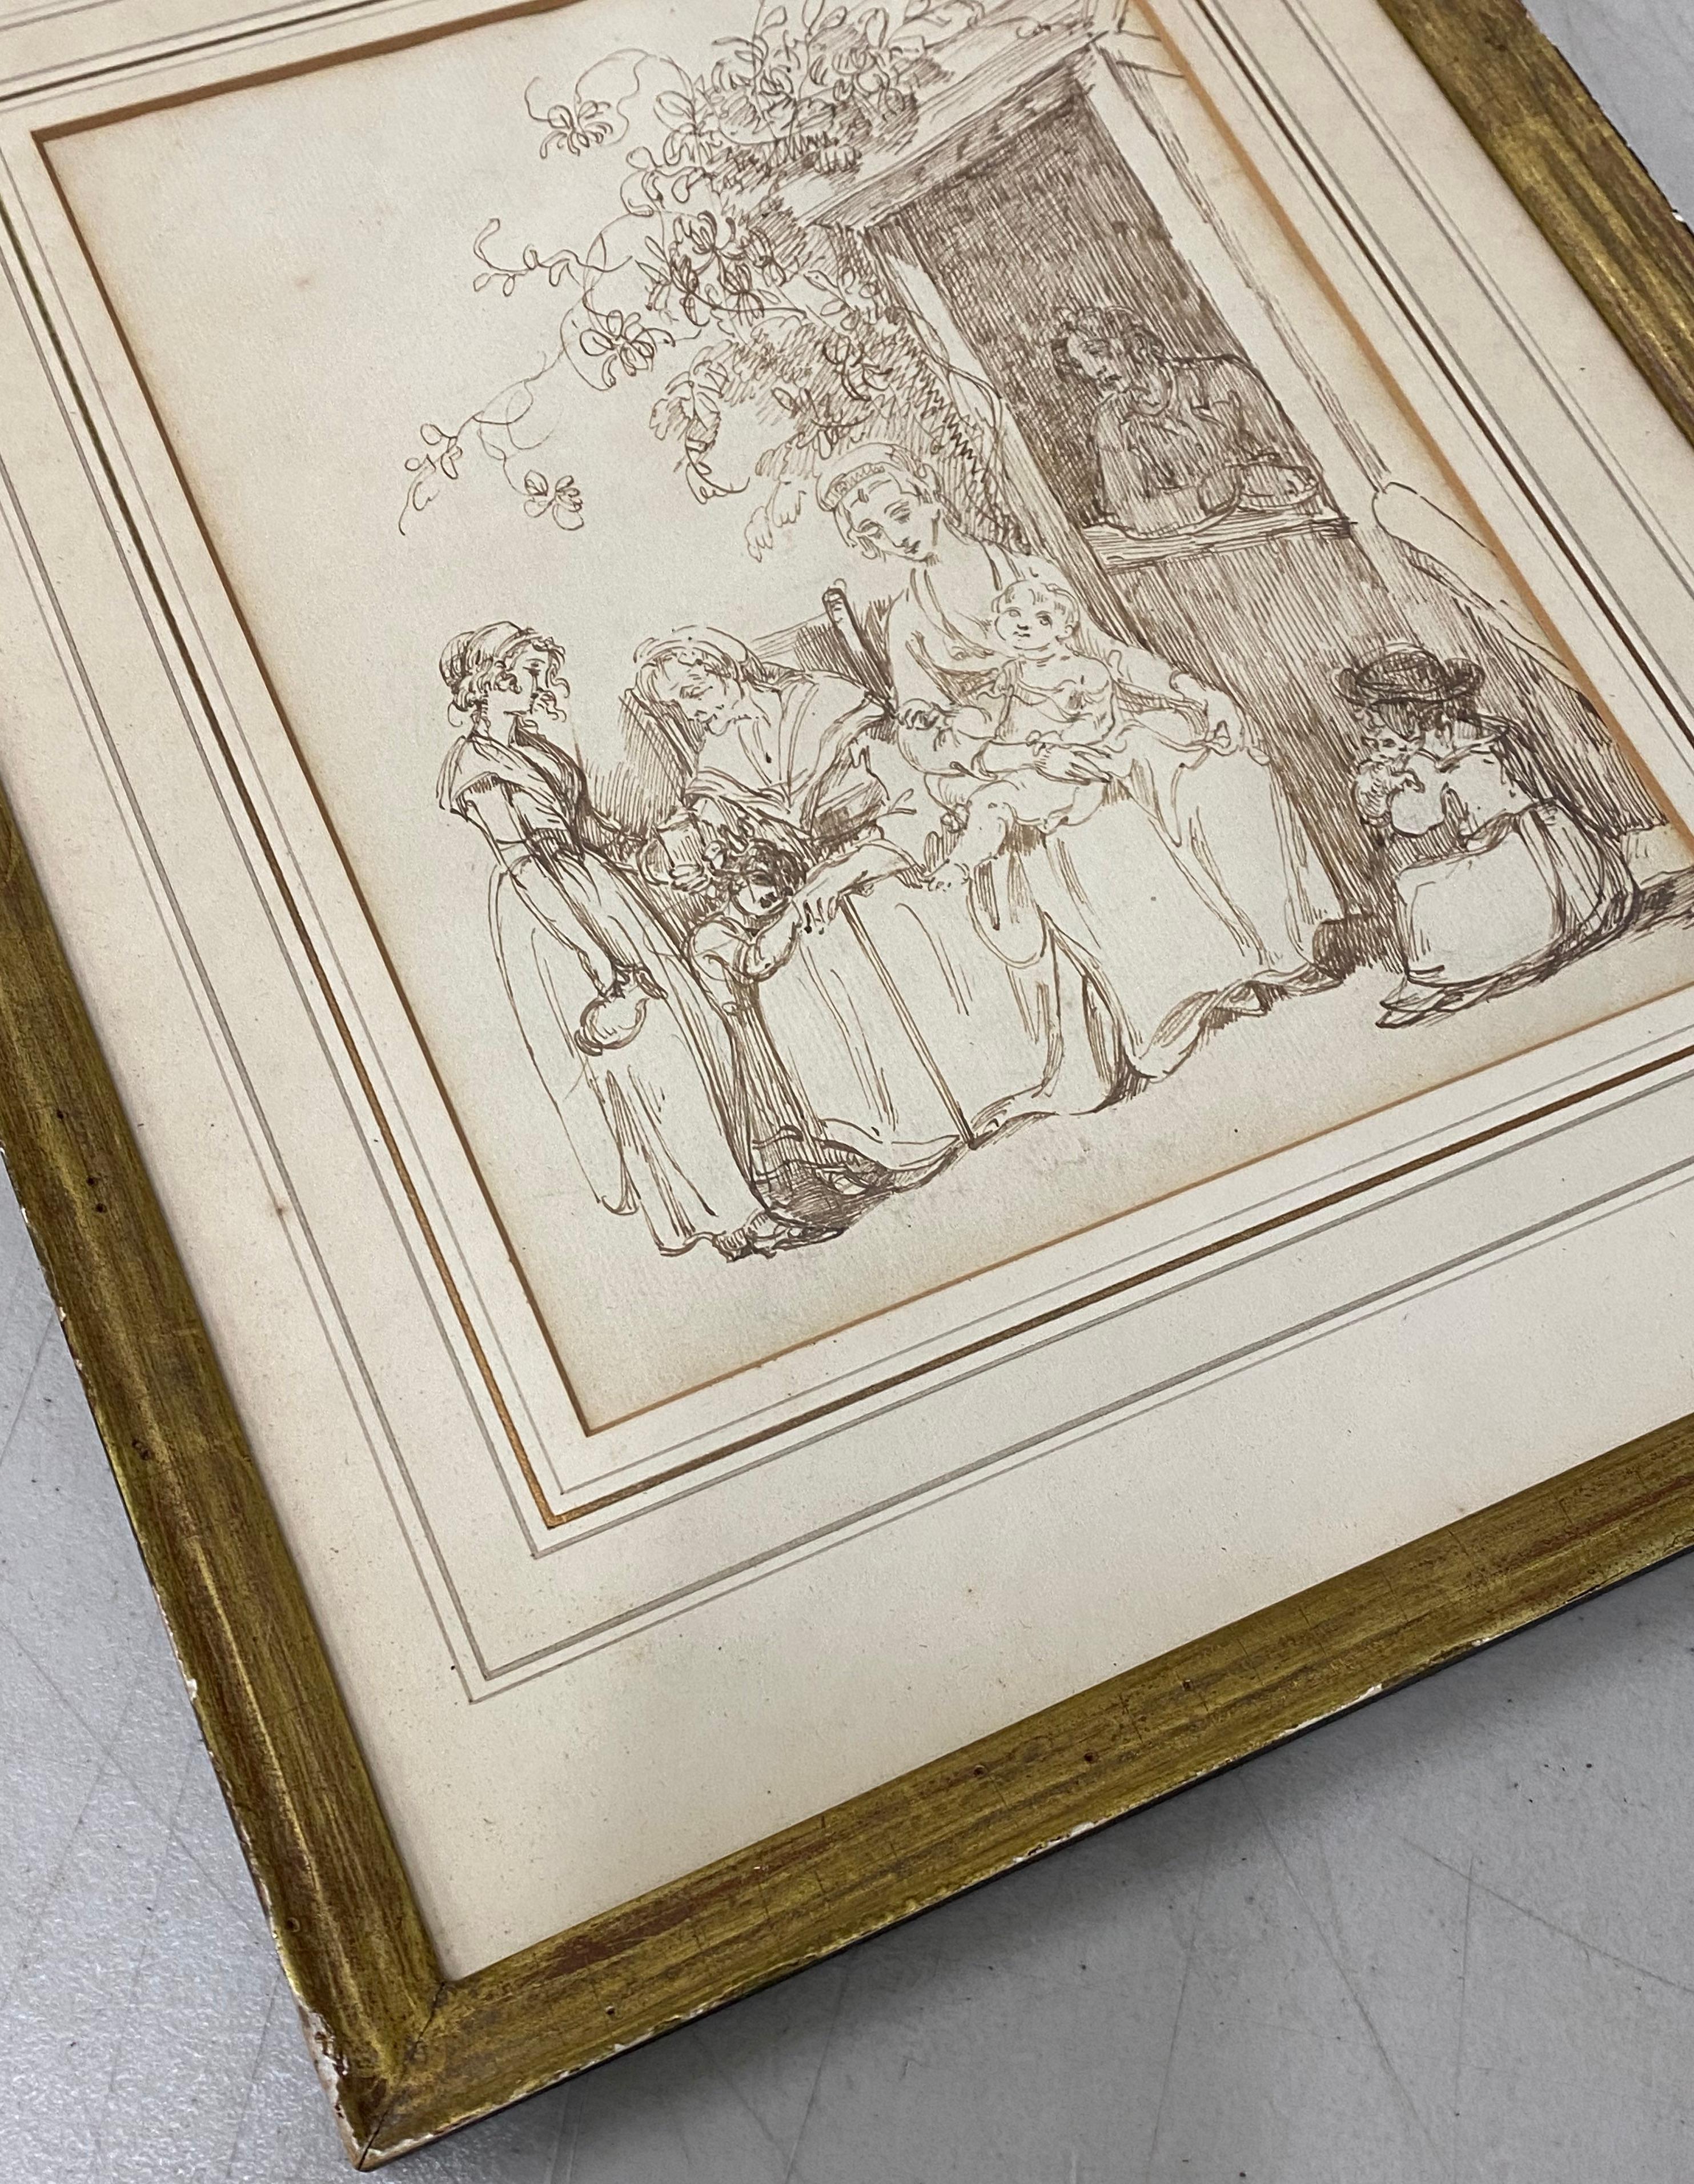 18th to 19th Century Pen and Ink Drawing - Impressionist Art by Unknown